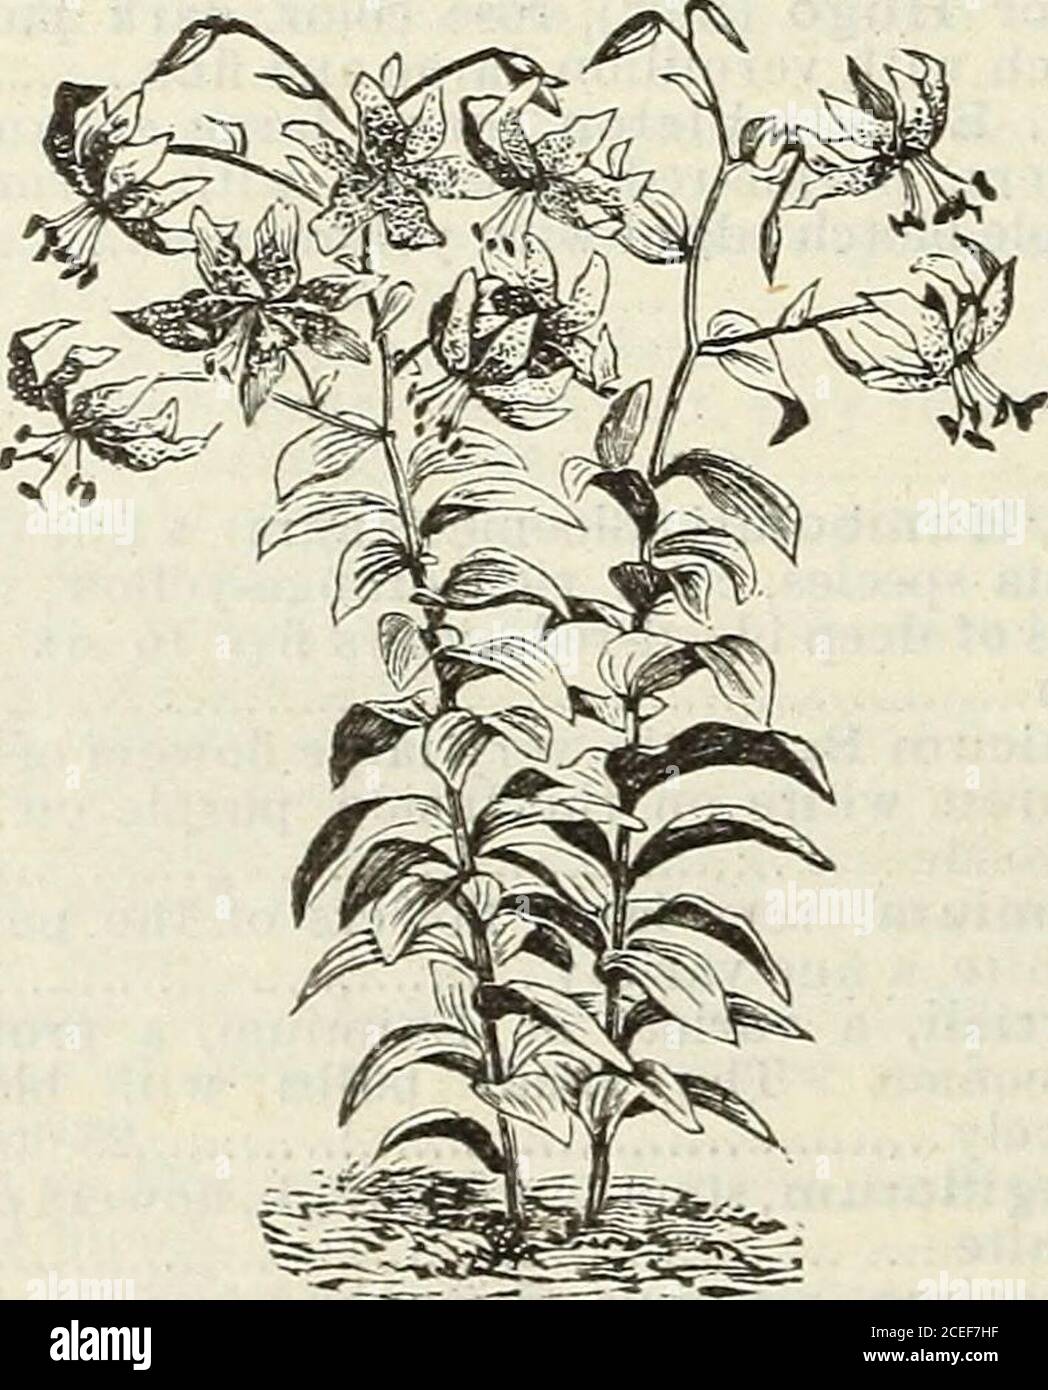 . John Saul's Washington nurseries catalogue of plants for the spring of 1888. DOUBLE TIGER LILY. Rubrum, Japan Lily, stem two to three feethigh, color white, sutlussd with red, anddotted with bright crimson on the innersurface 25 Macranthum, a variety of Rubrum, flowerslarge and highly colored 40. LILIUM SPECIOSUM. Monstrosum Album, white, monstrous flow-ered 40 Roseum, rose spotted, flowered 40 Rubrum, crimson spotted, flowered 40 Precox, early flowering and distinct variety, flowers pure white 50 Roseum, white, spotted with rose 20 MISCELLANEOUS *Agapanthus Umbellatus (African Lily), large Stock Photo